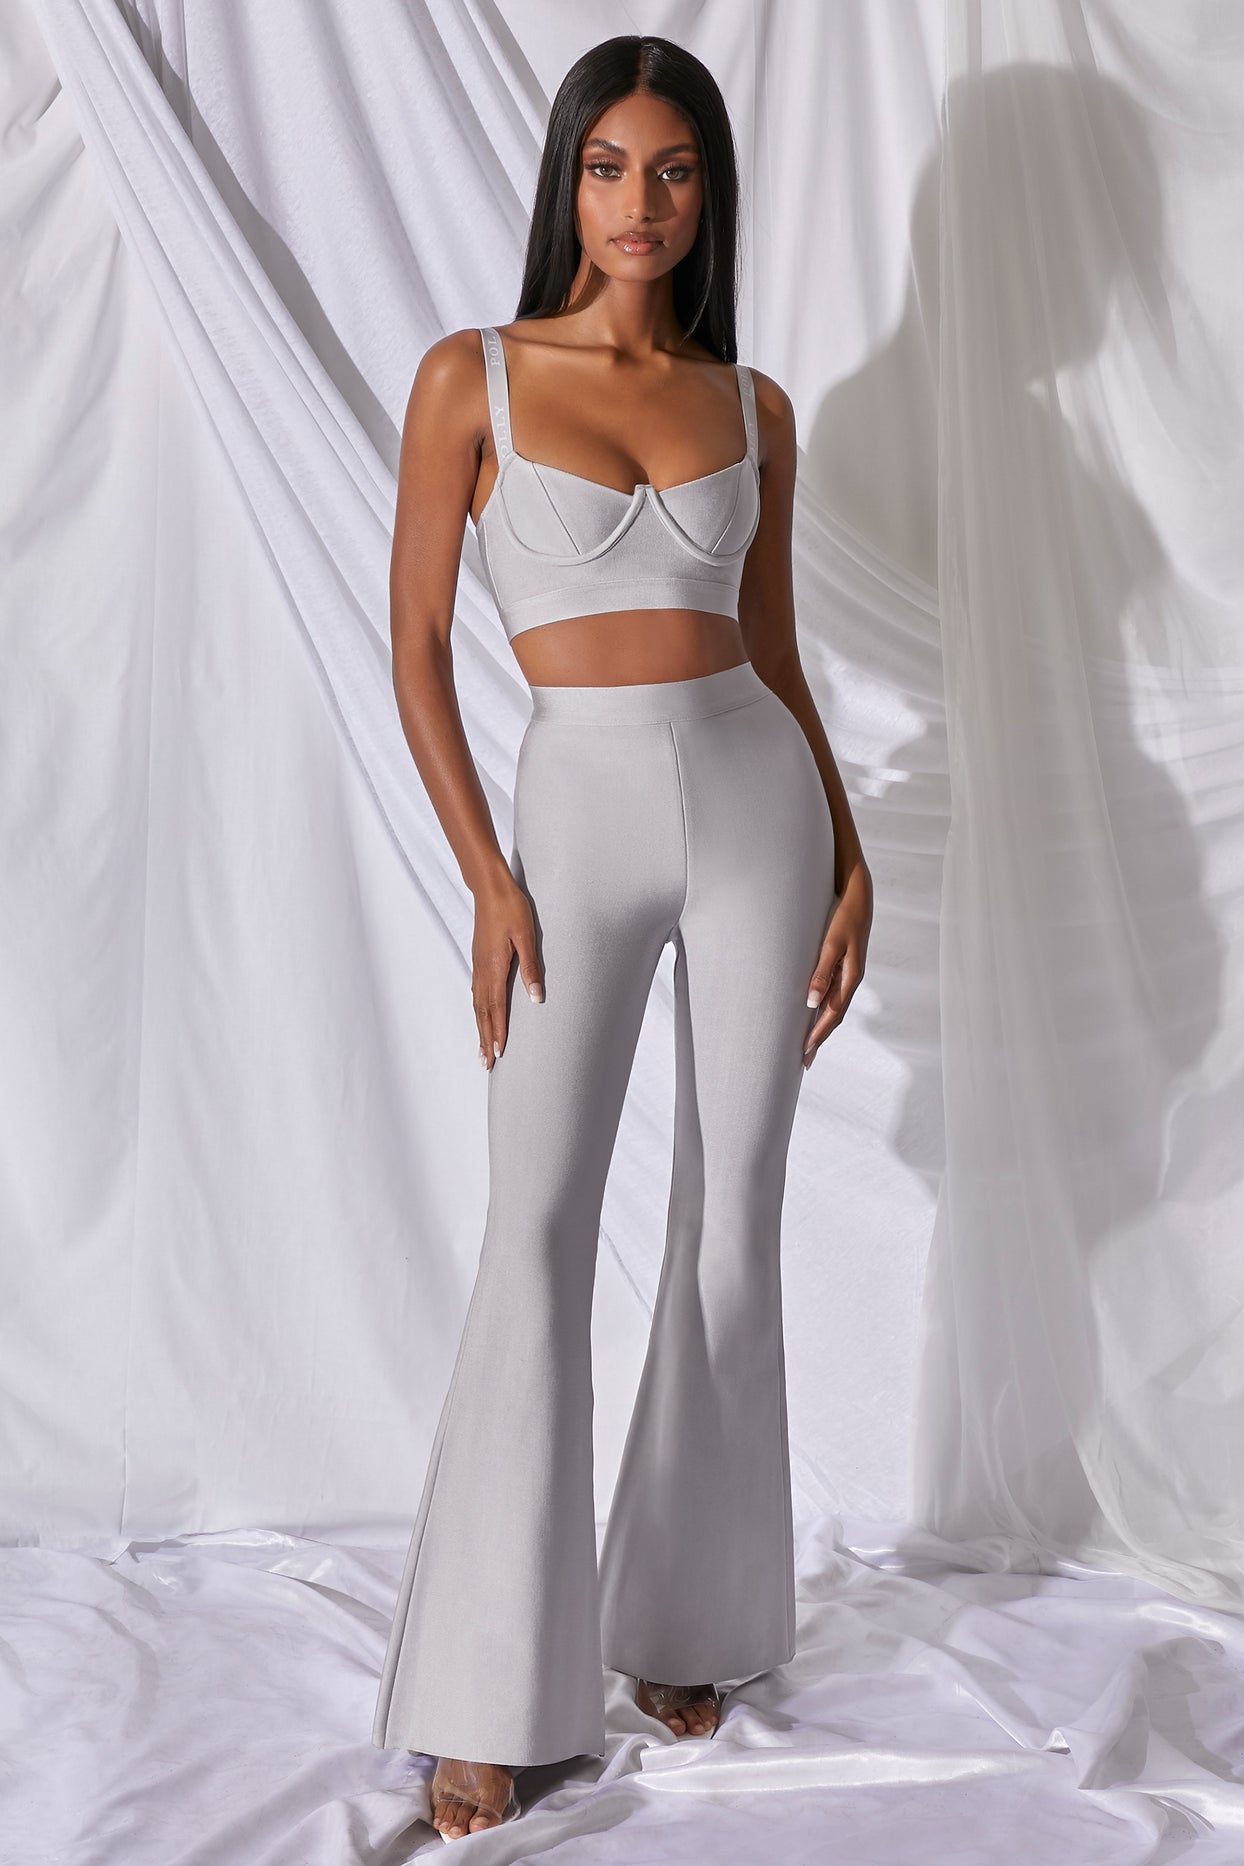 Too Good For You Underwired Bandage Crop Top in Grey